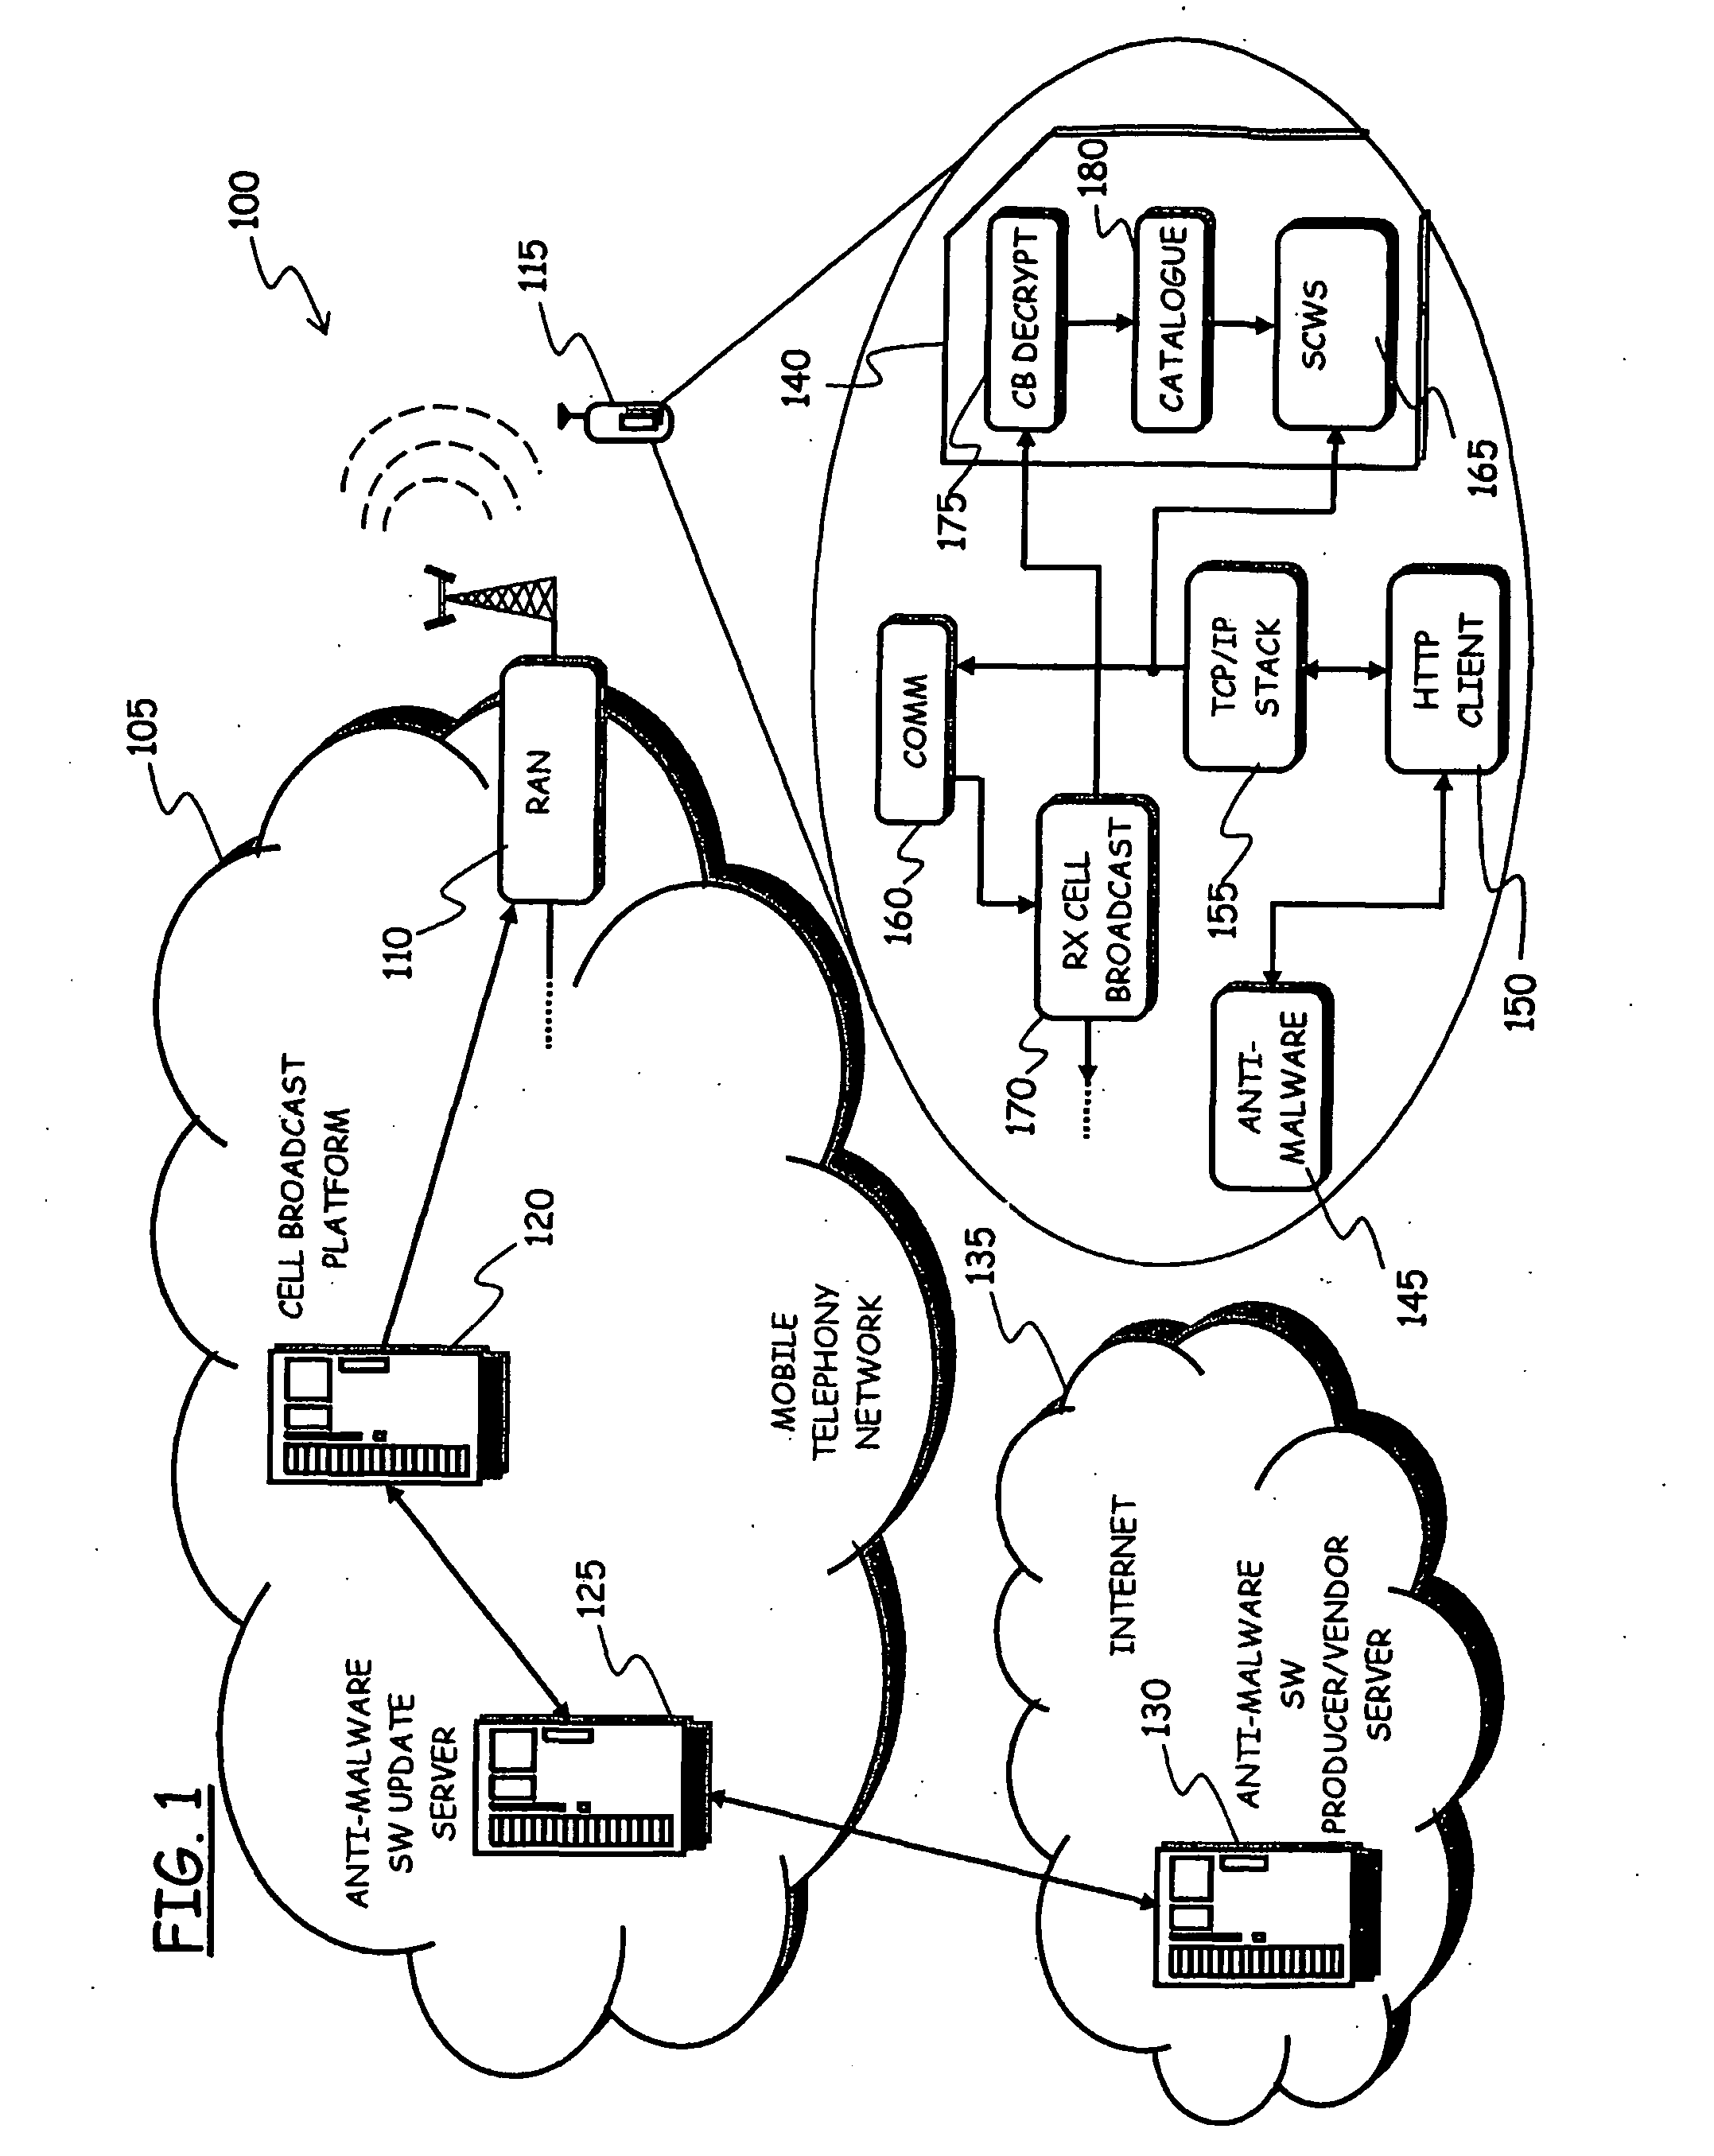 Method and System for Updating Applications in Mobile Communications Terminals